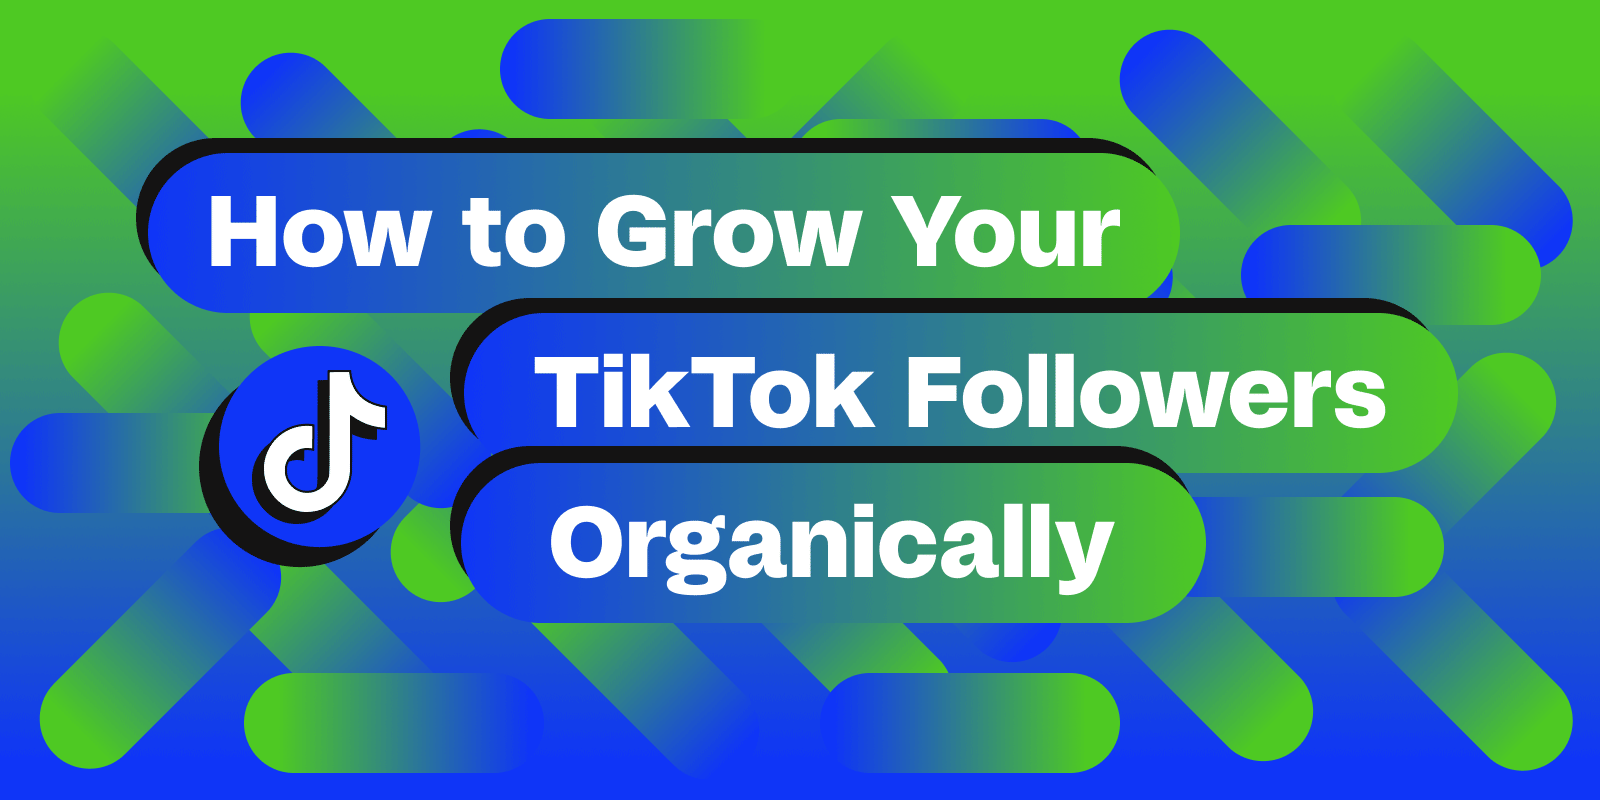 10 Strategies for Growing Your TikTok Following